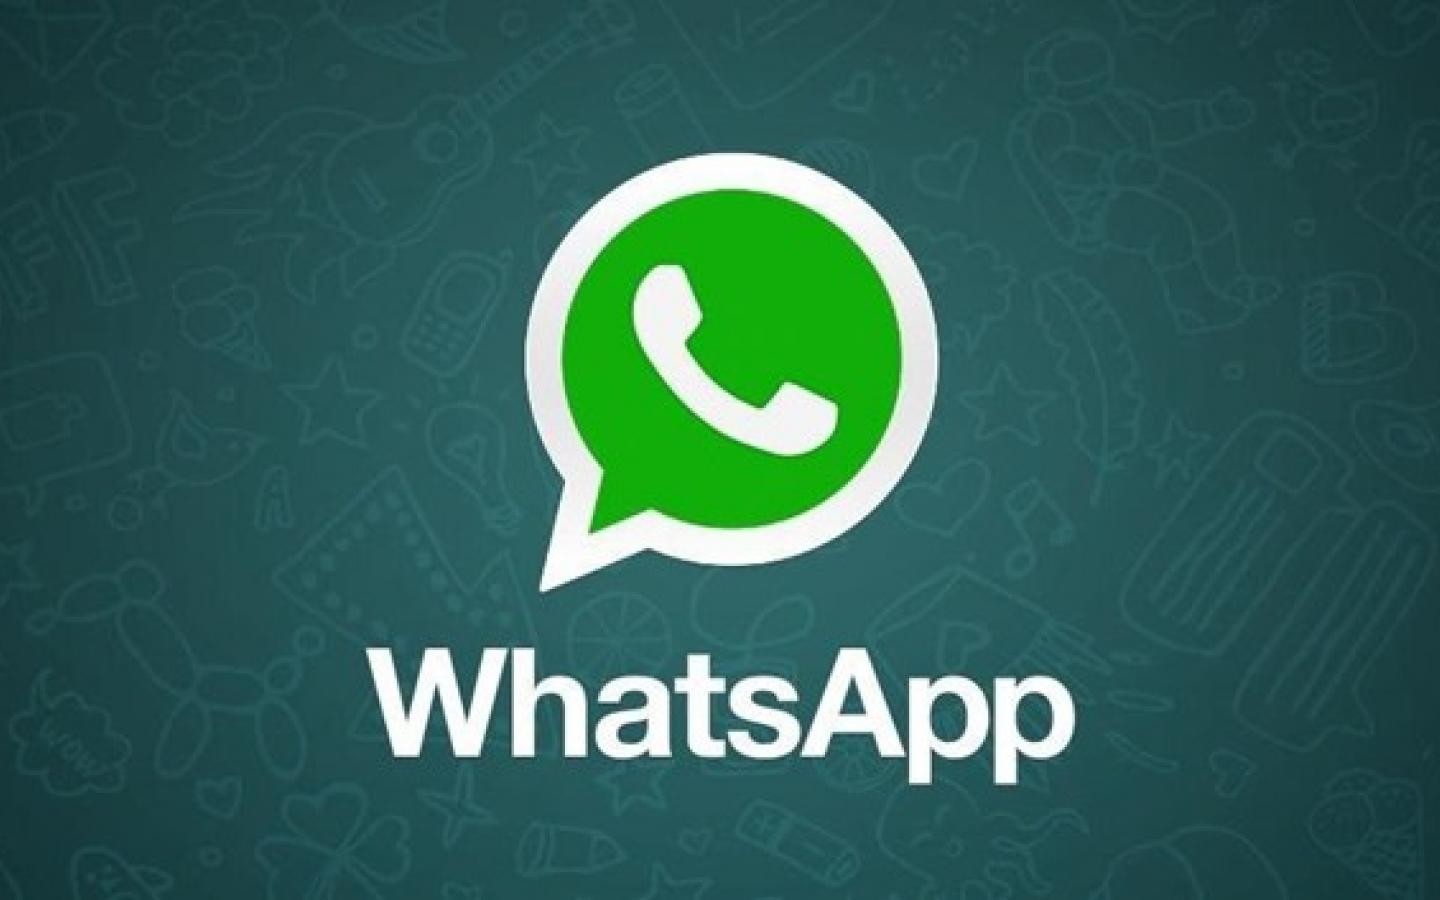 WhatsApp latest features enable multi-sharing, audio preview: Here's what you should know